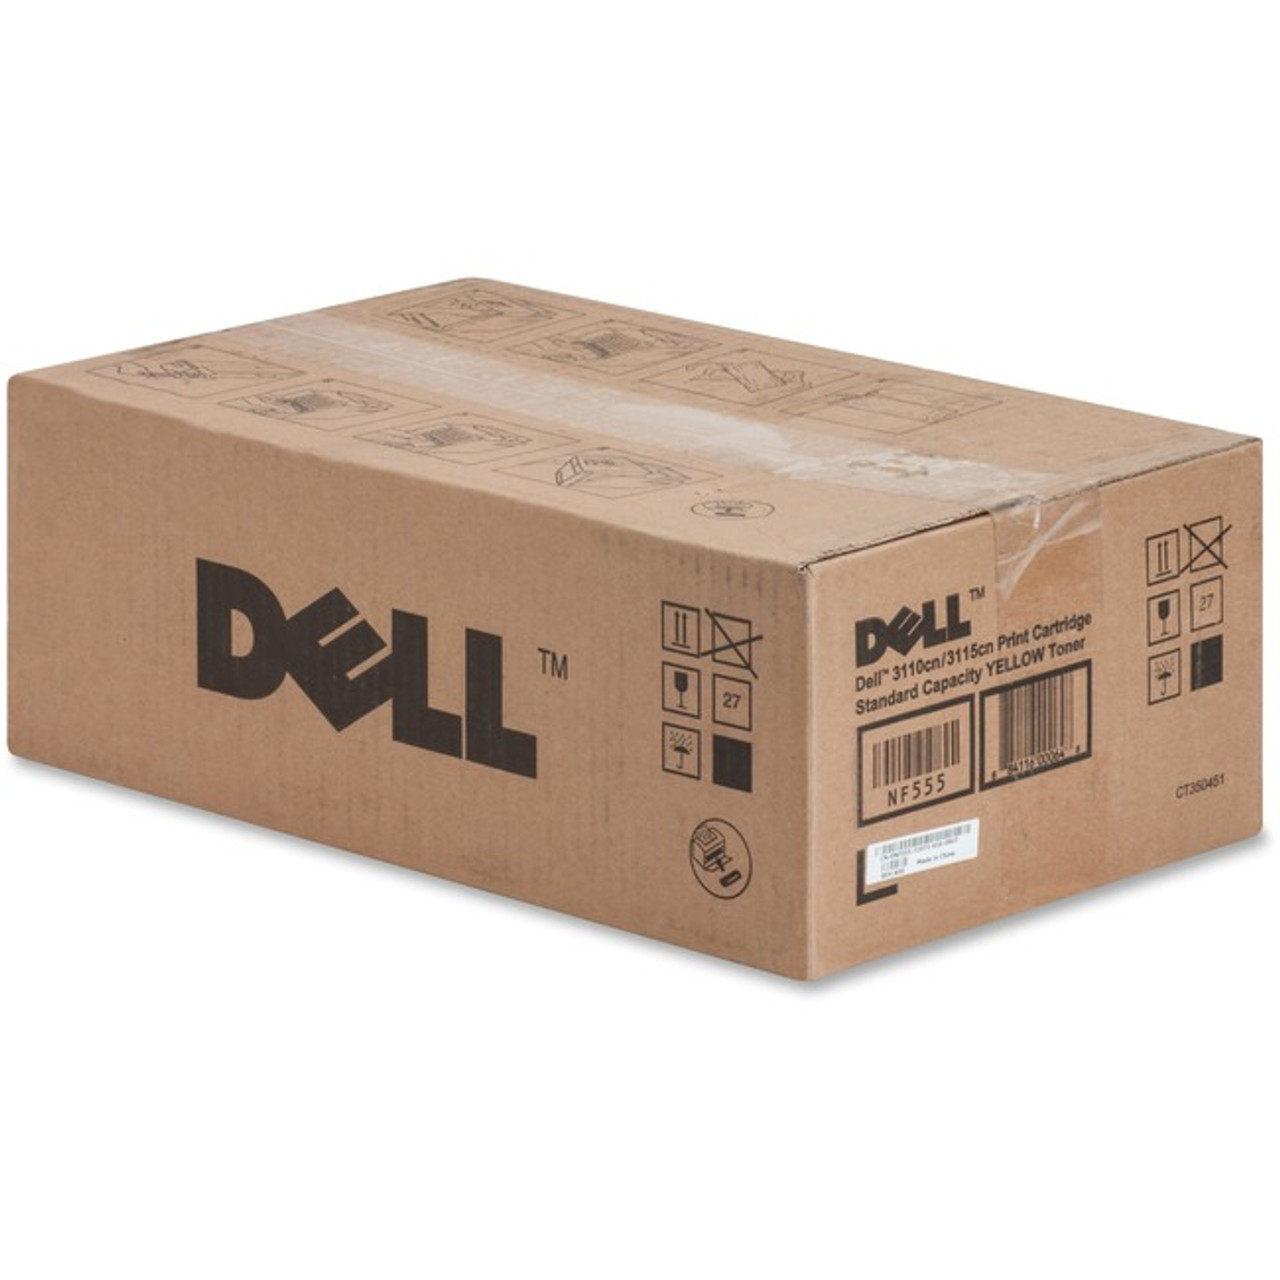 Dell NF555